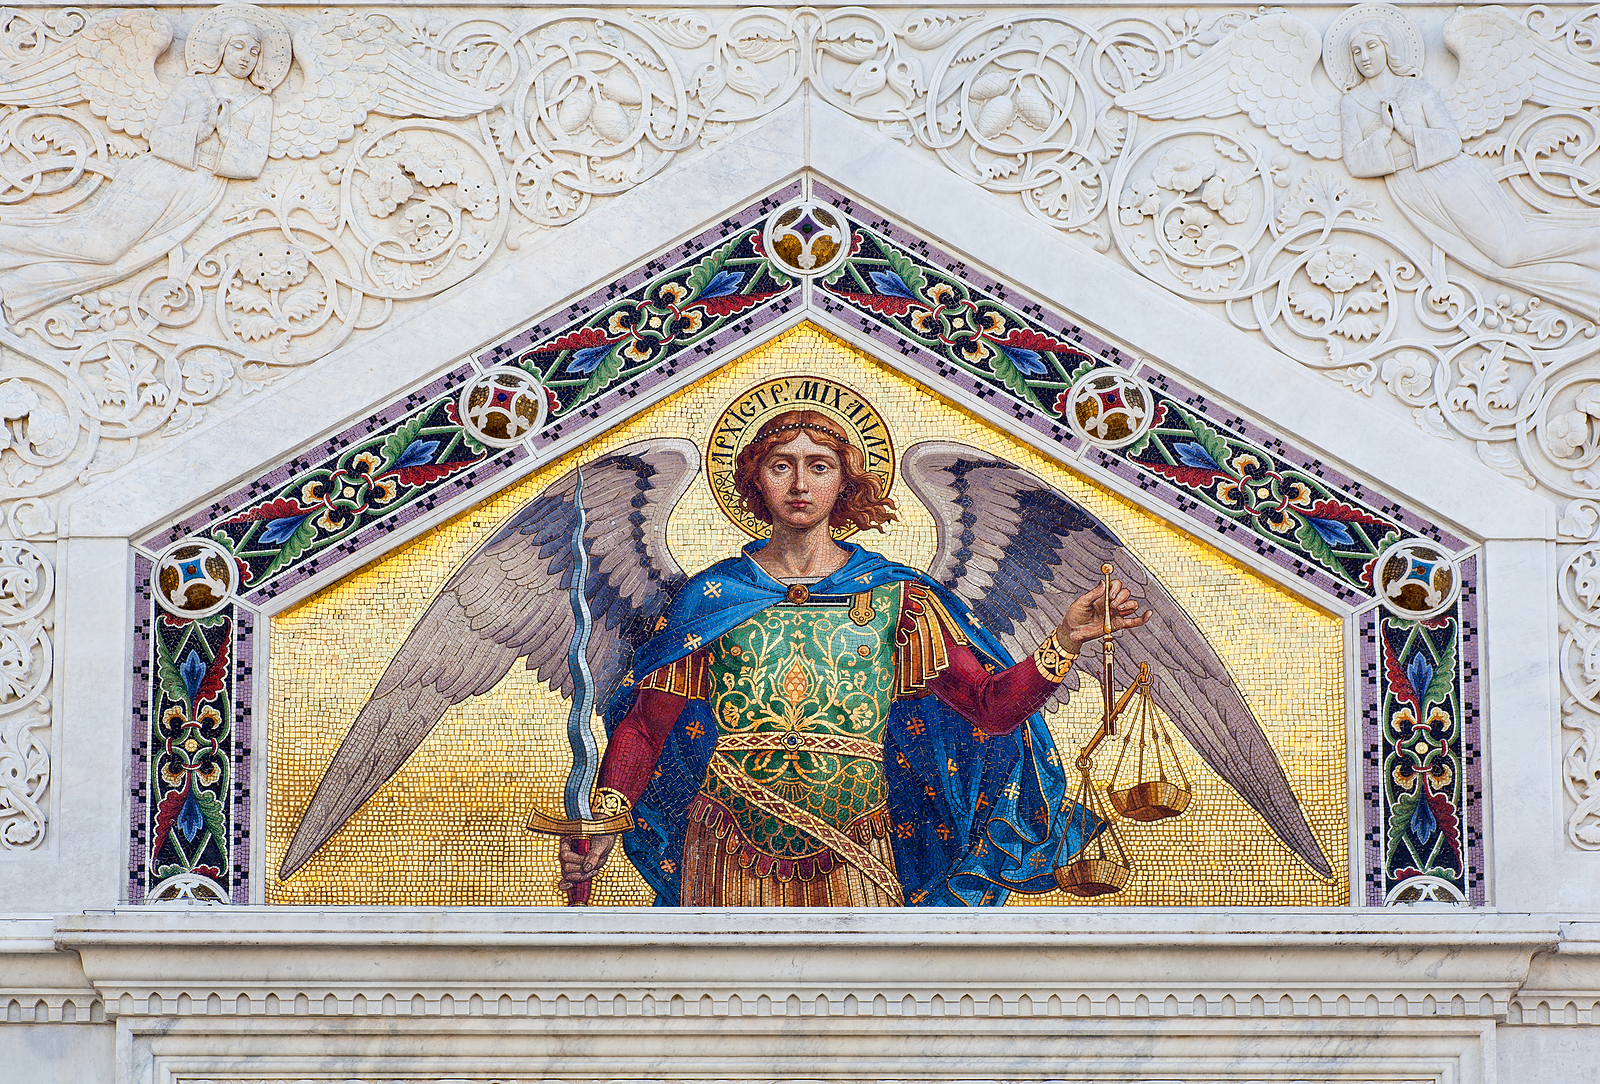 The Archangel Michael as a Symbol of Protection and Justice